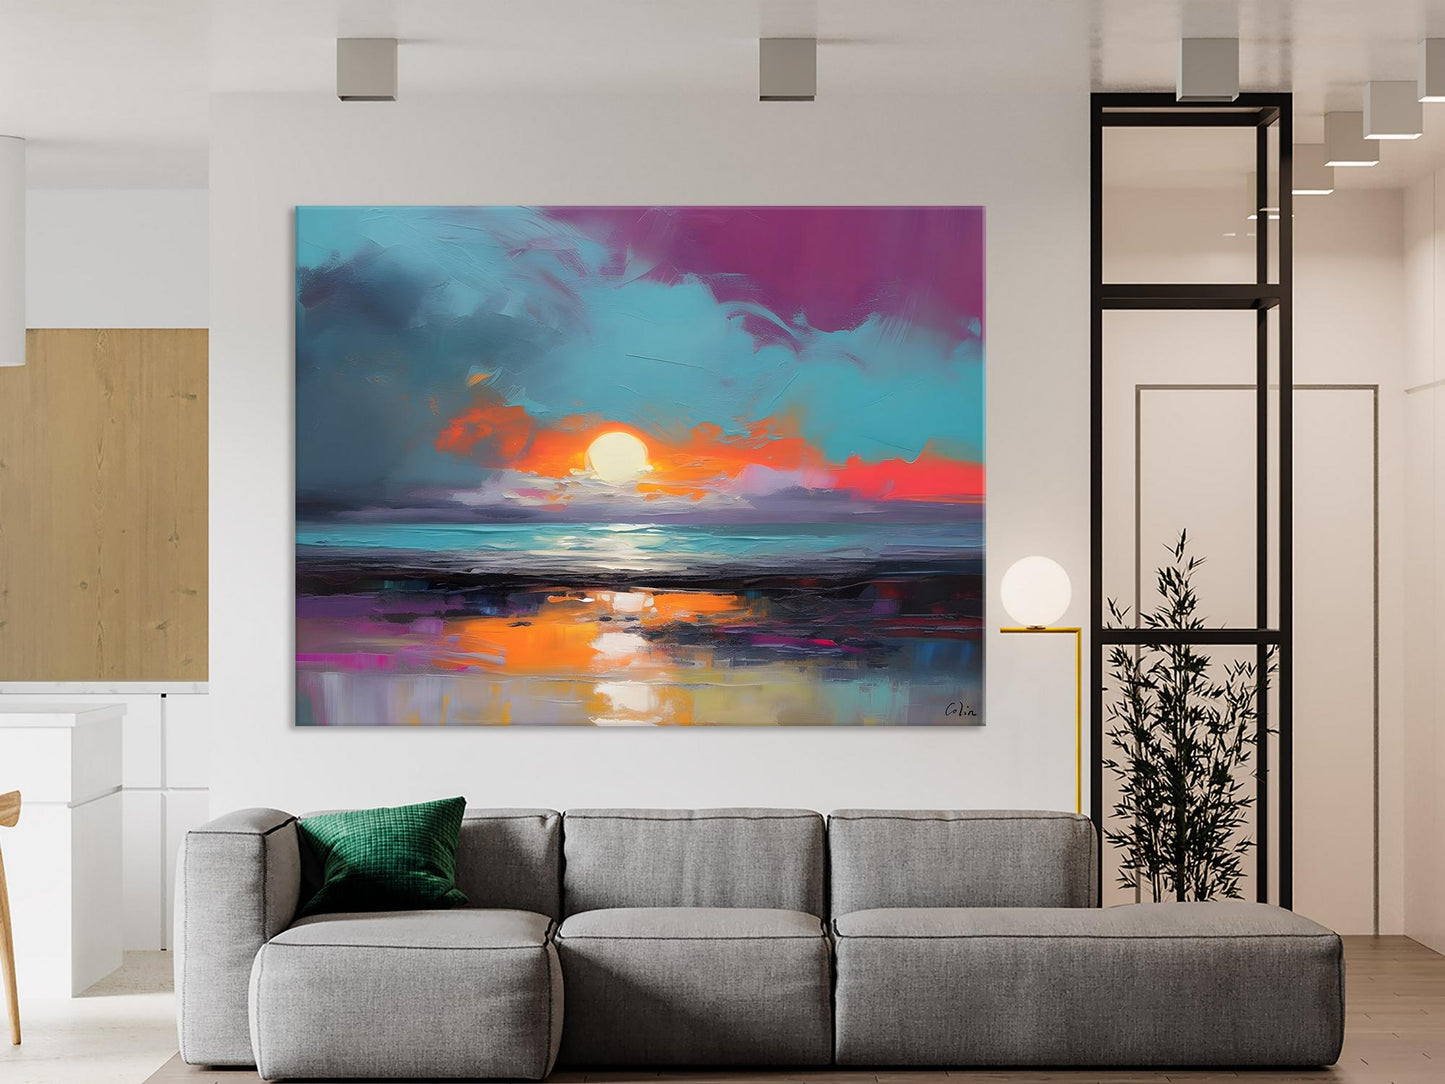 Contemporary Wall Art Paintings, Abstract Landscape Paintings for Living Room, Landscape Canvas Art, Large Acrylic Paintings on Canvas